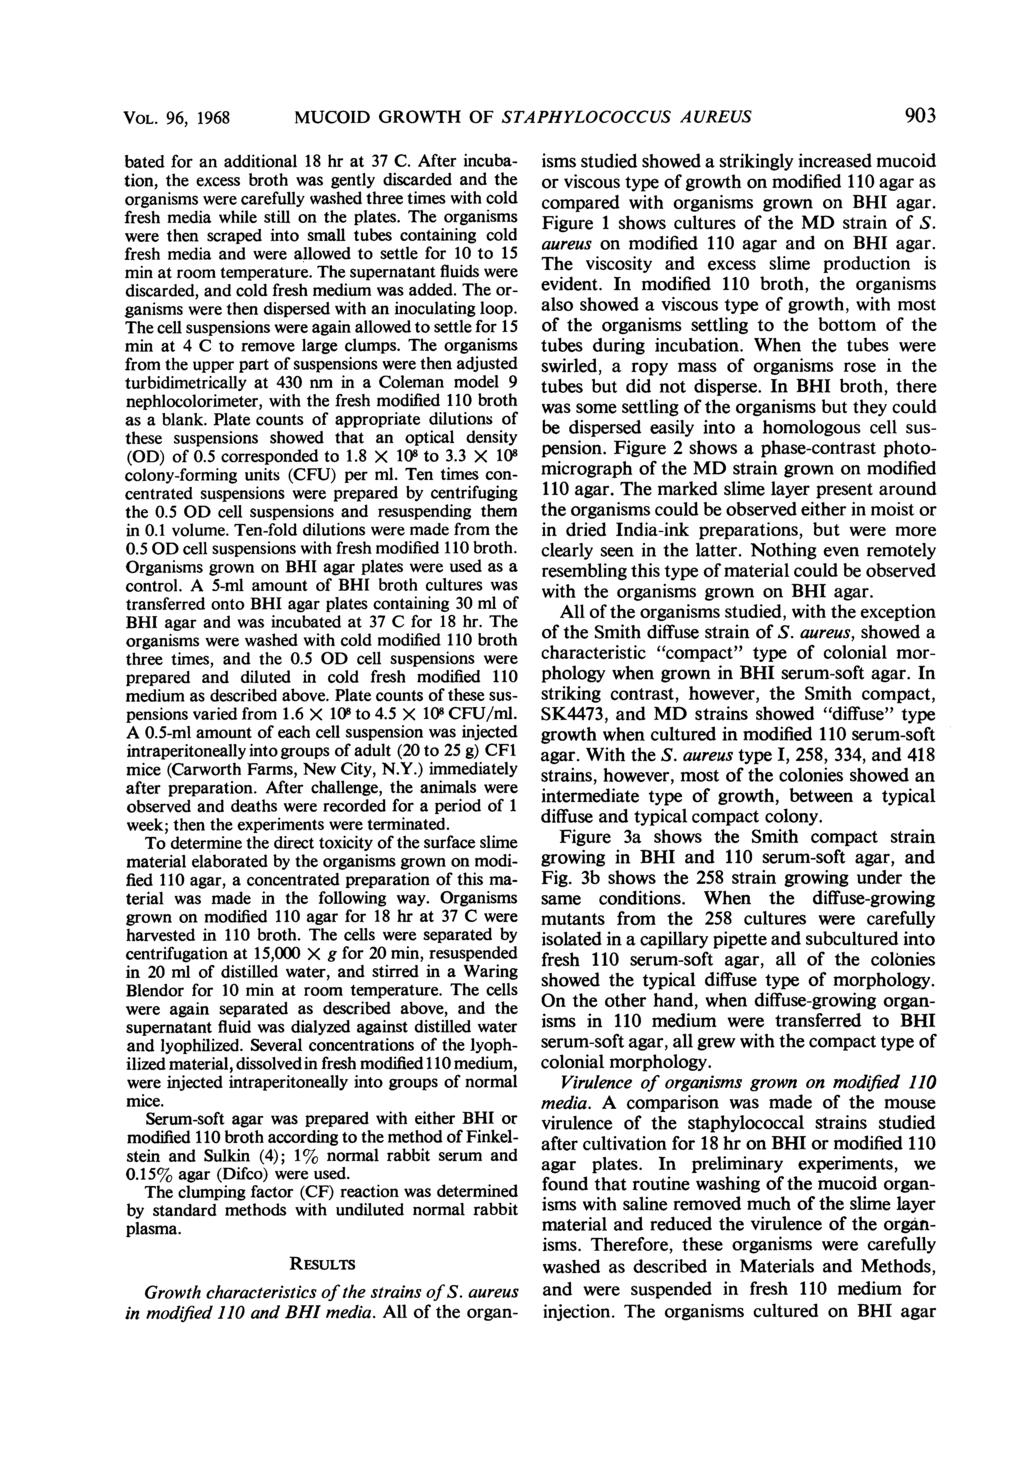 VOL. 96, 1968 MUCOID GROWTH OF STAPHYLOCOCCUS AUREUS bated for an additional 18 hr at 37 C.